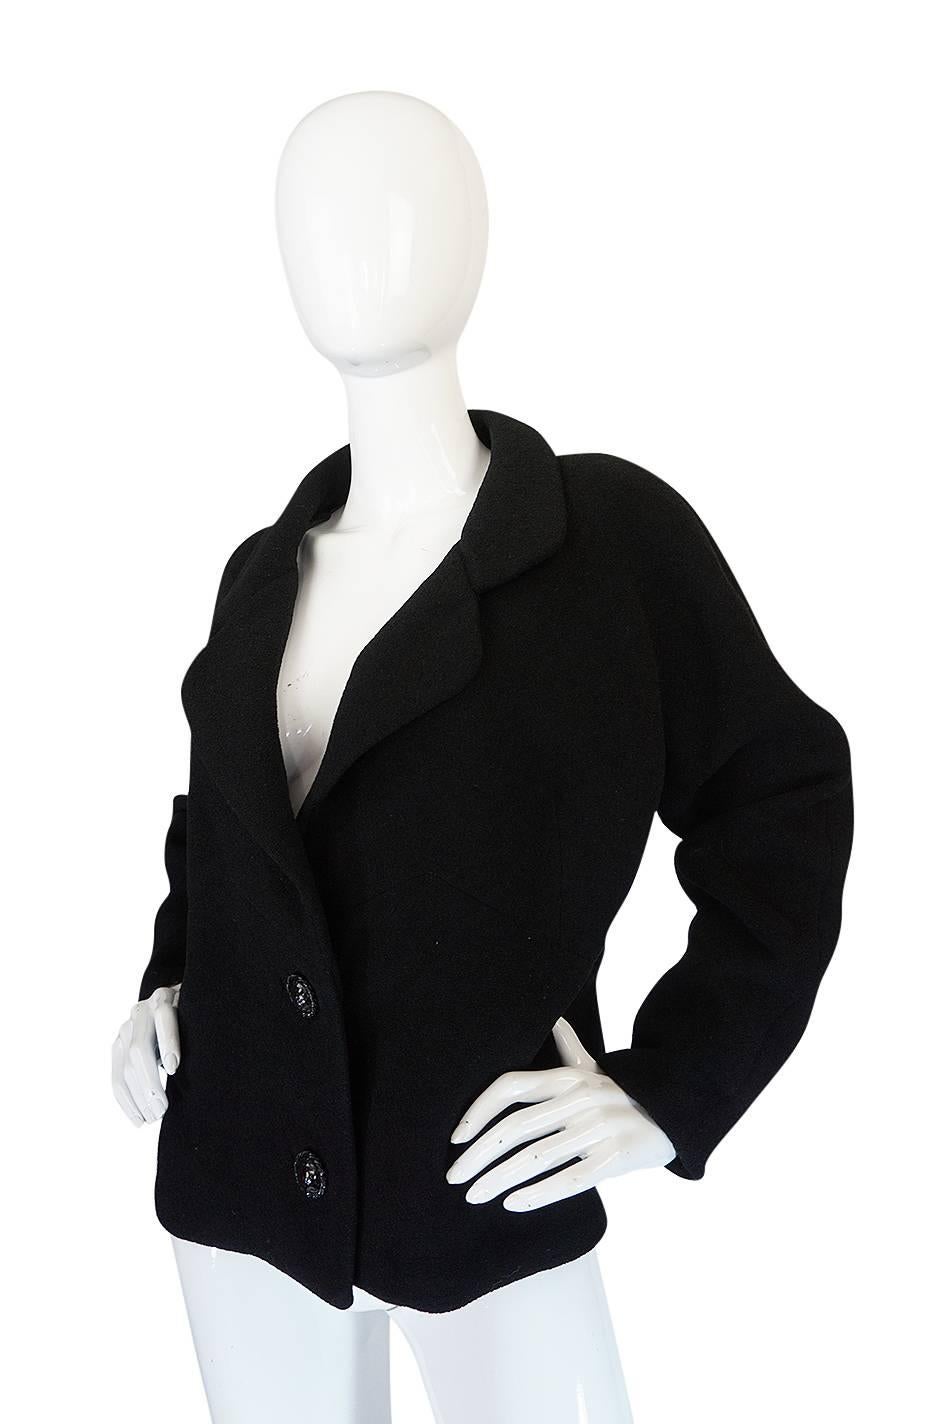 

You can never go wrong with a perfectly made little black jacket and this stupendous Haute Coutre Balenciaga example is perhaps the epitome of that statement. Balenciaga has gone down in history as being one of the great Masters of couture and